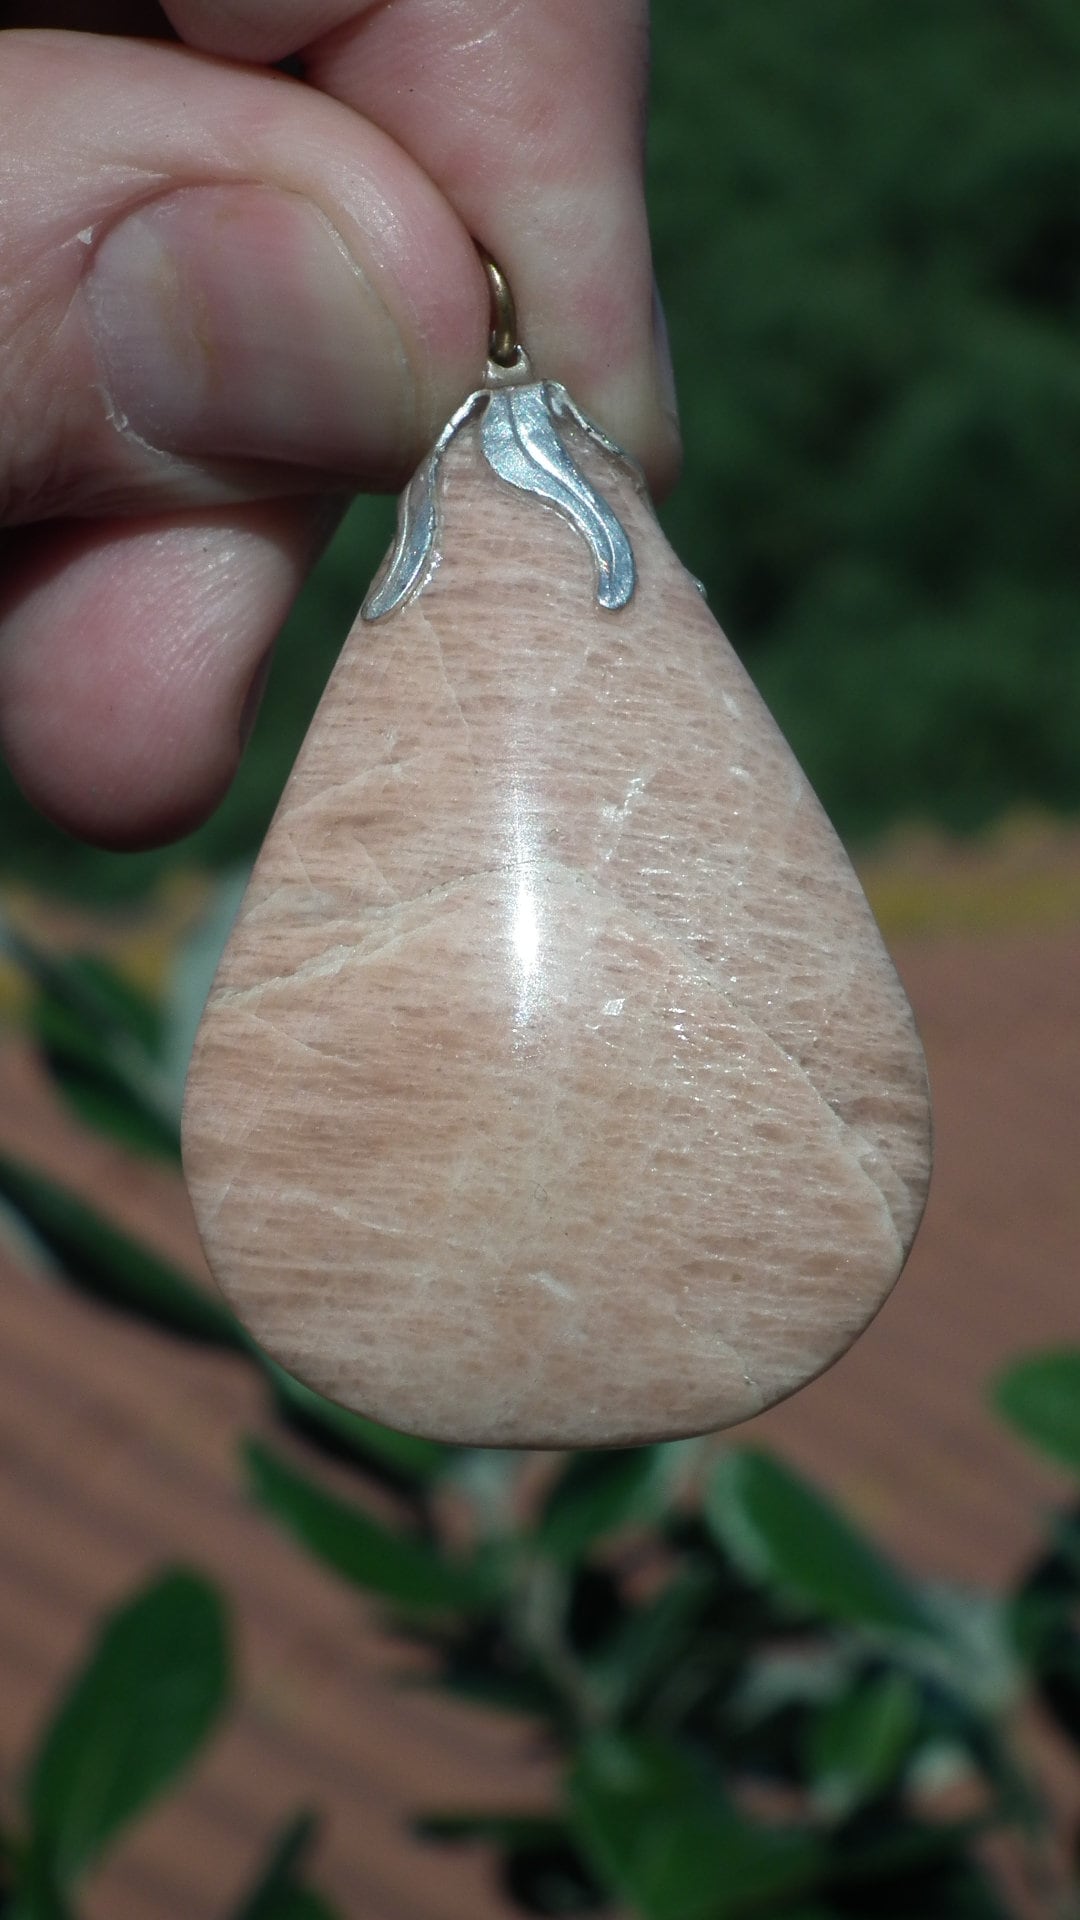 Peach moonstone necklace with silverplated bail